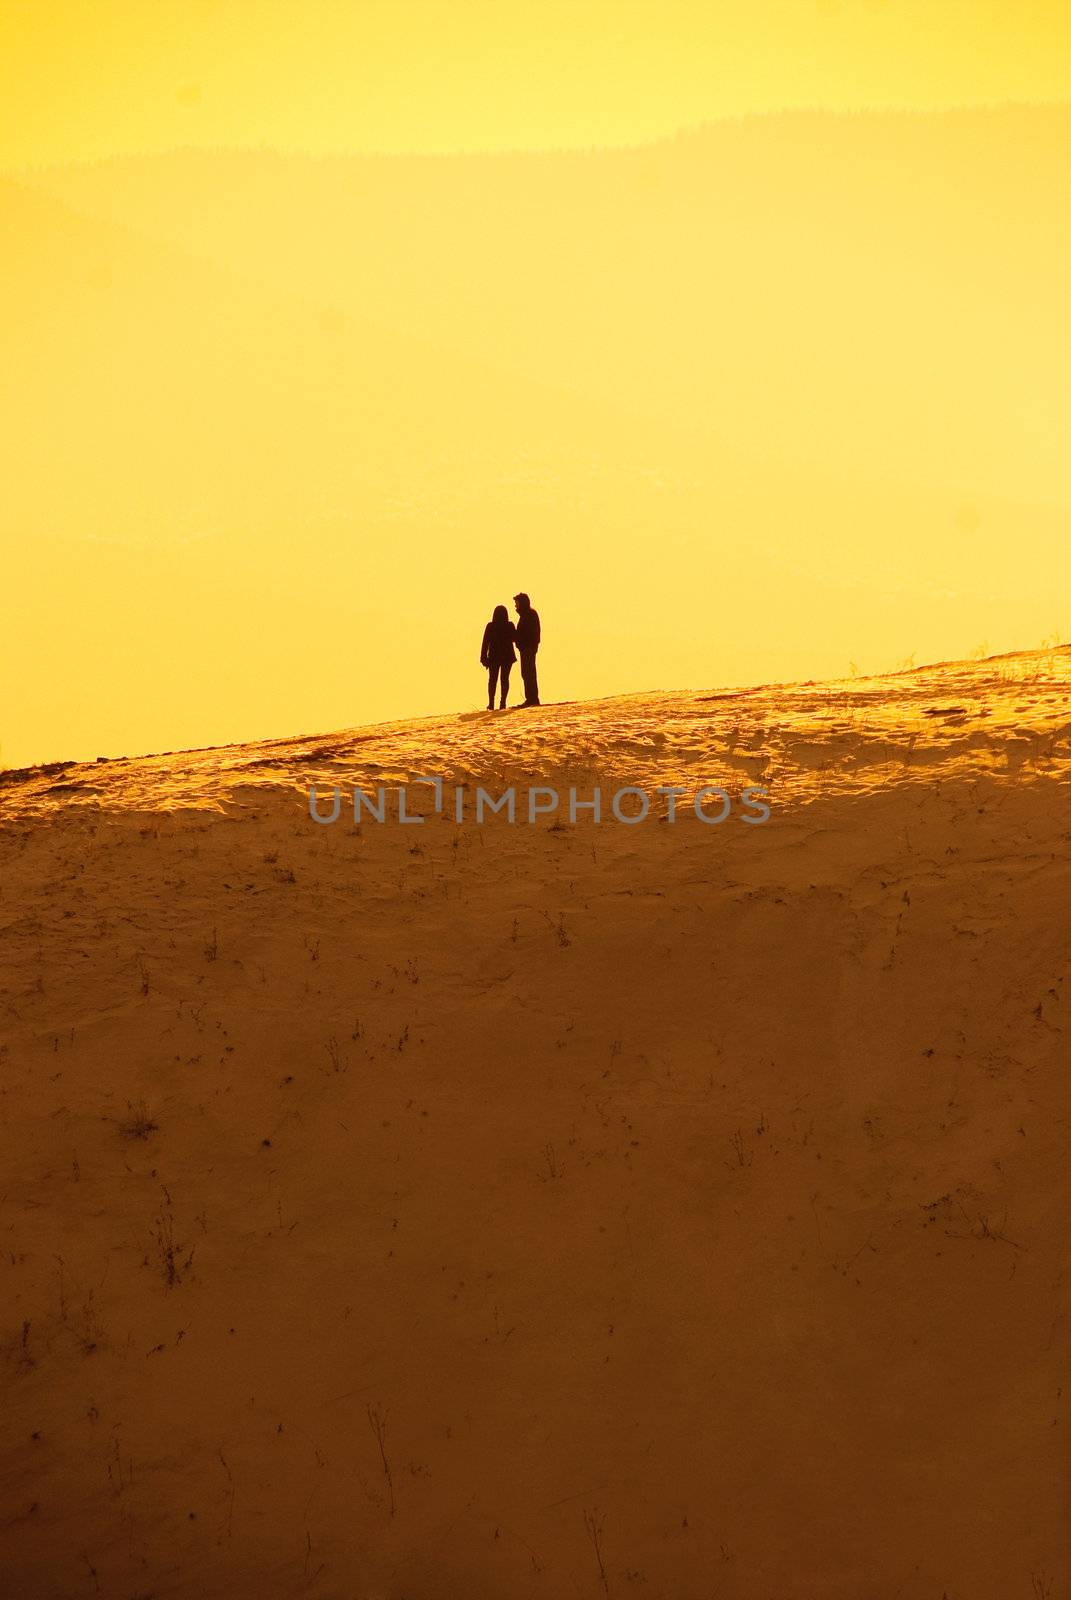 solitude, silhouettes of a man and a woman standing on the hill and holding hands